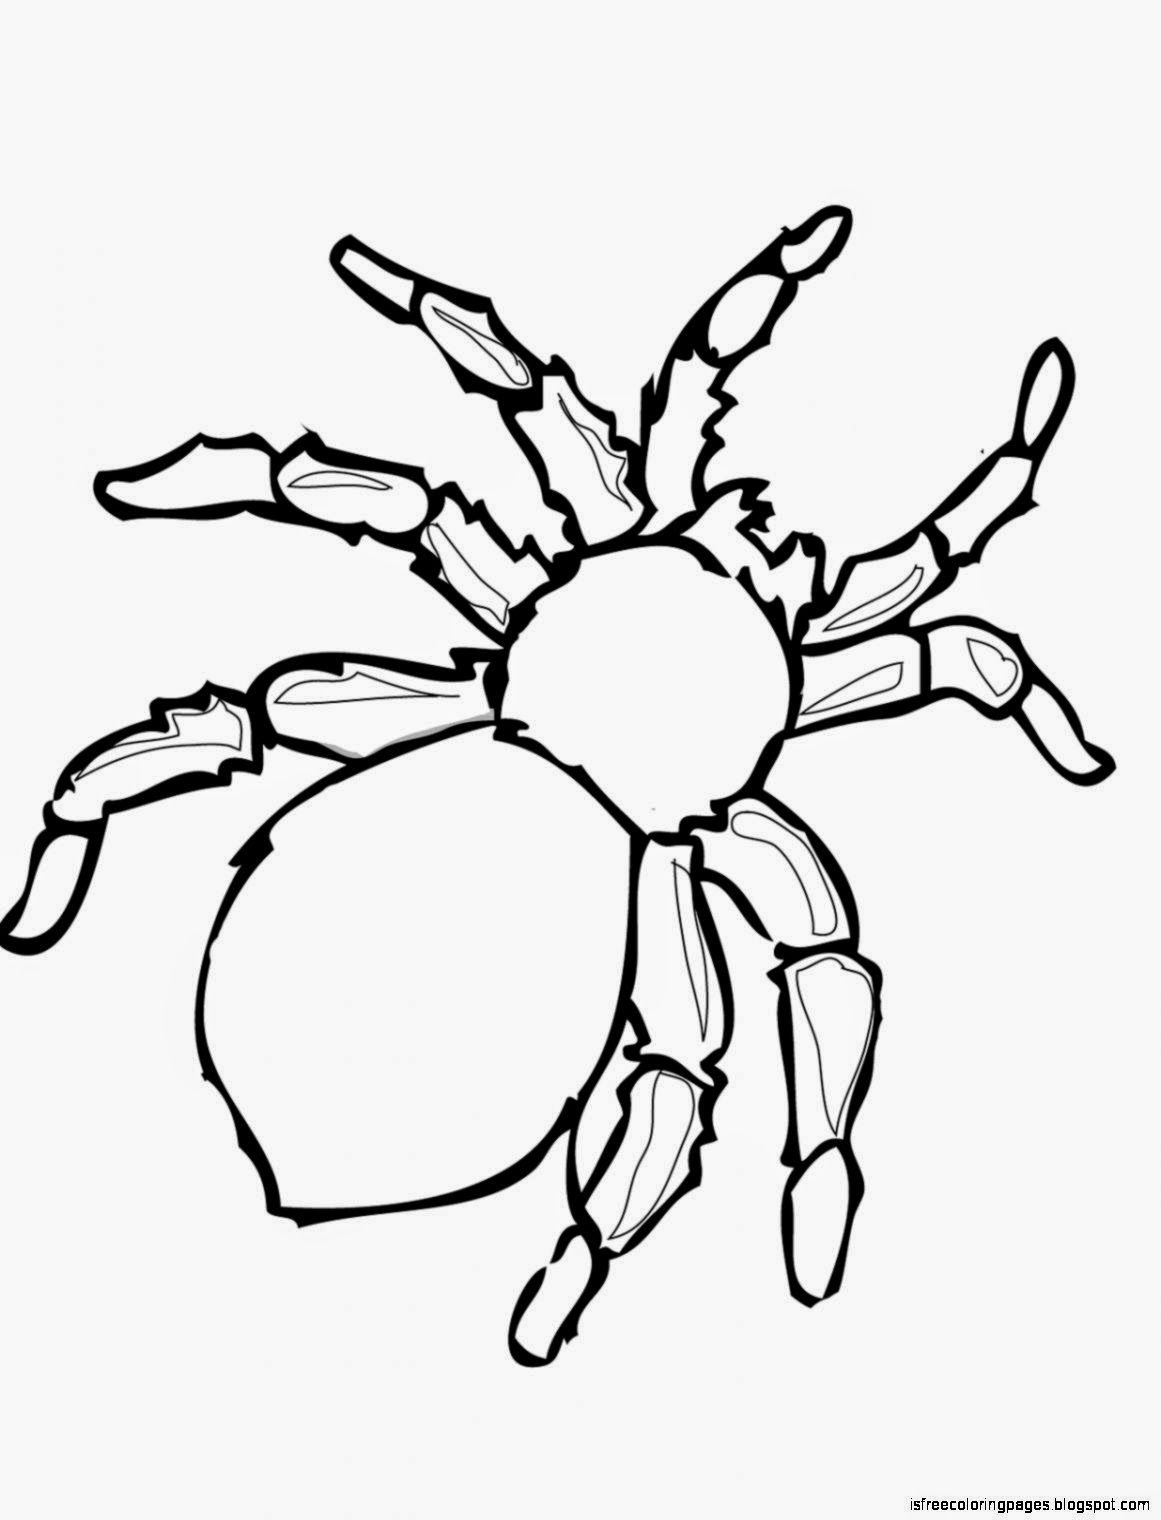 Spiders Coloring Pages | Free Coloring Pages